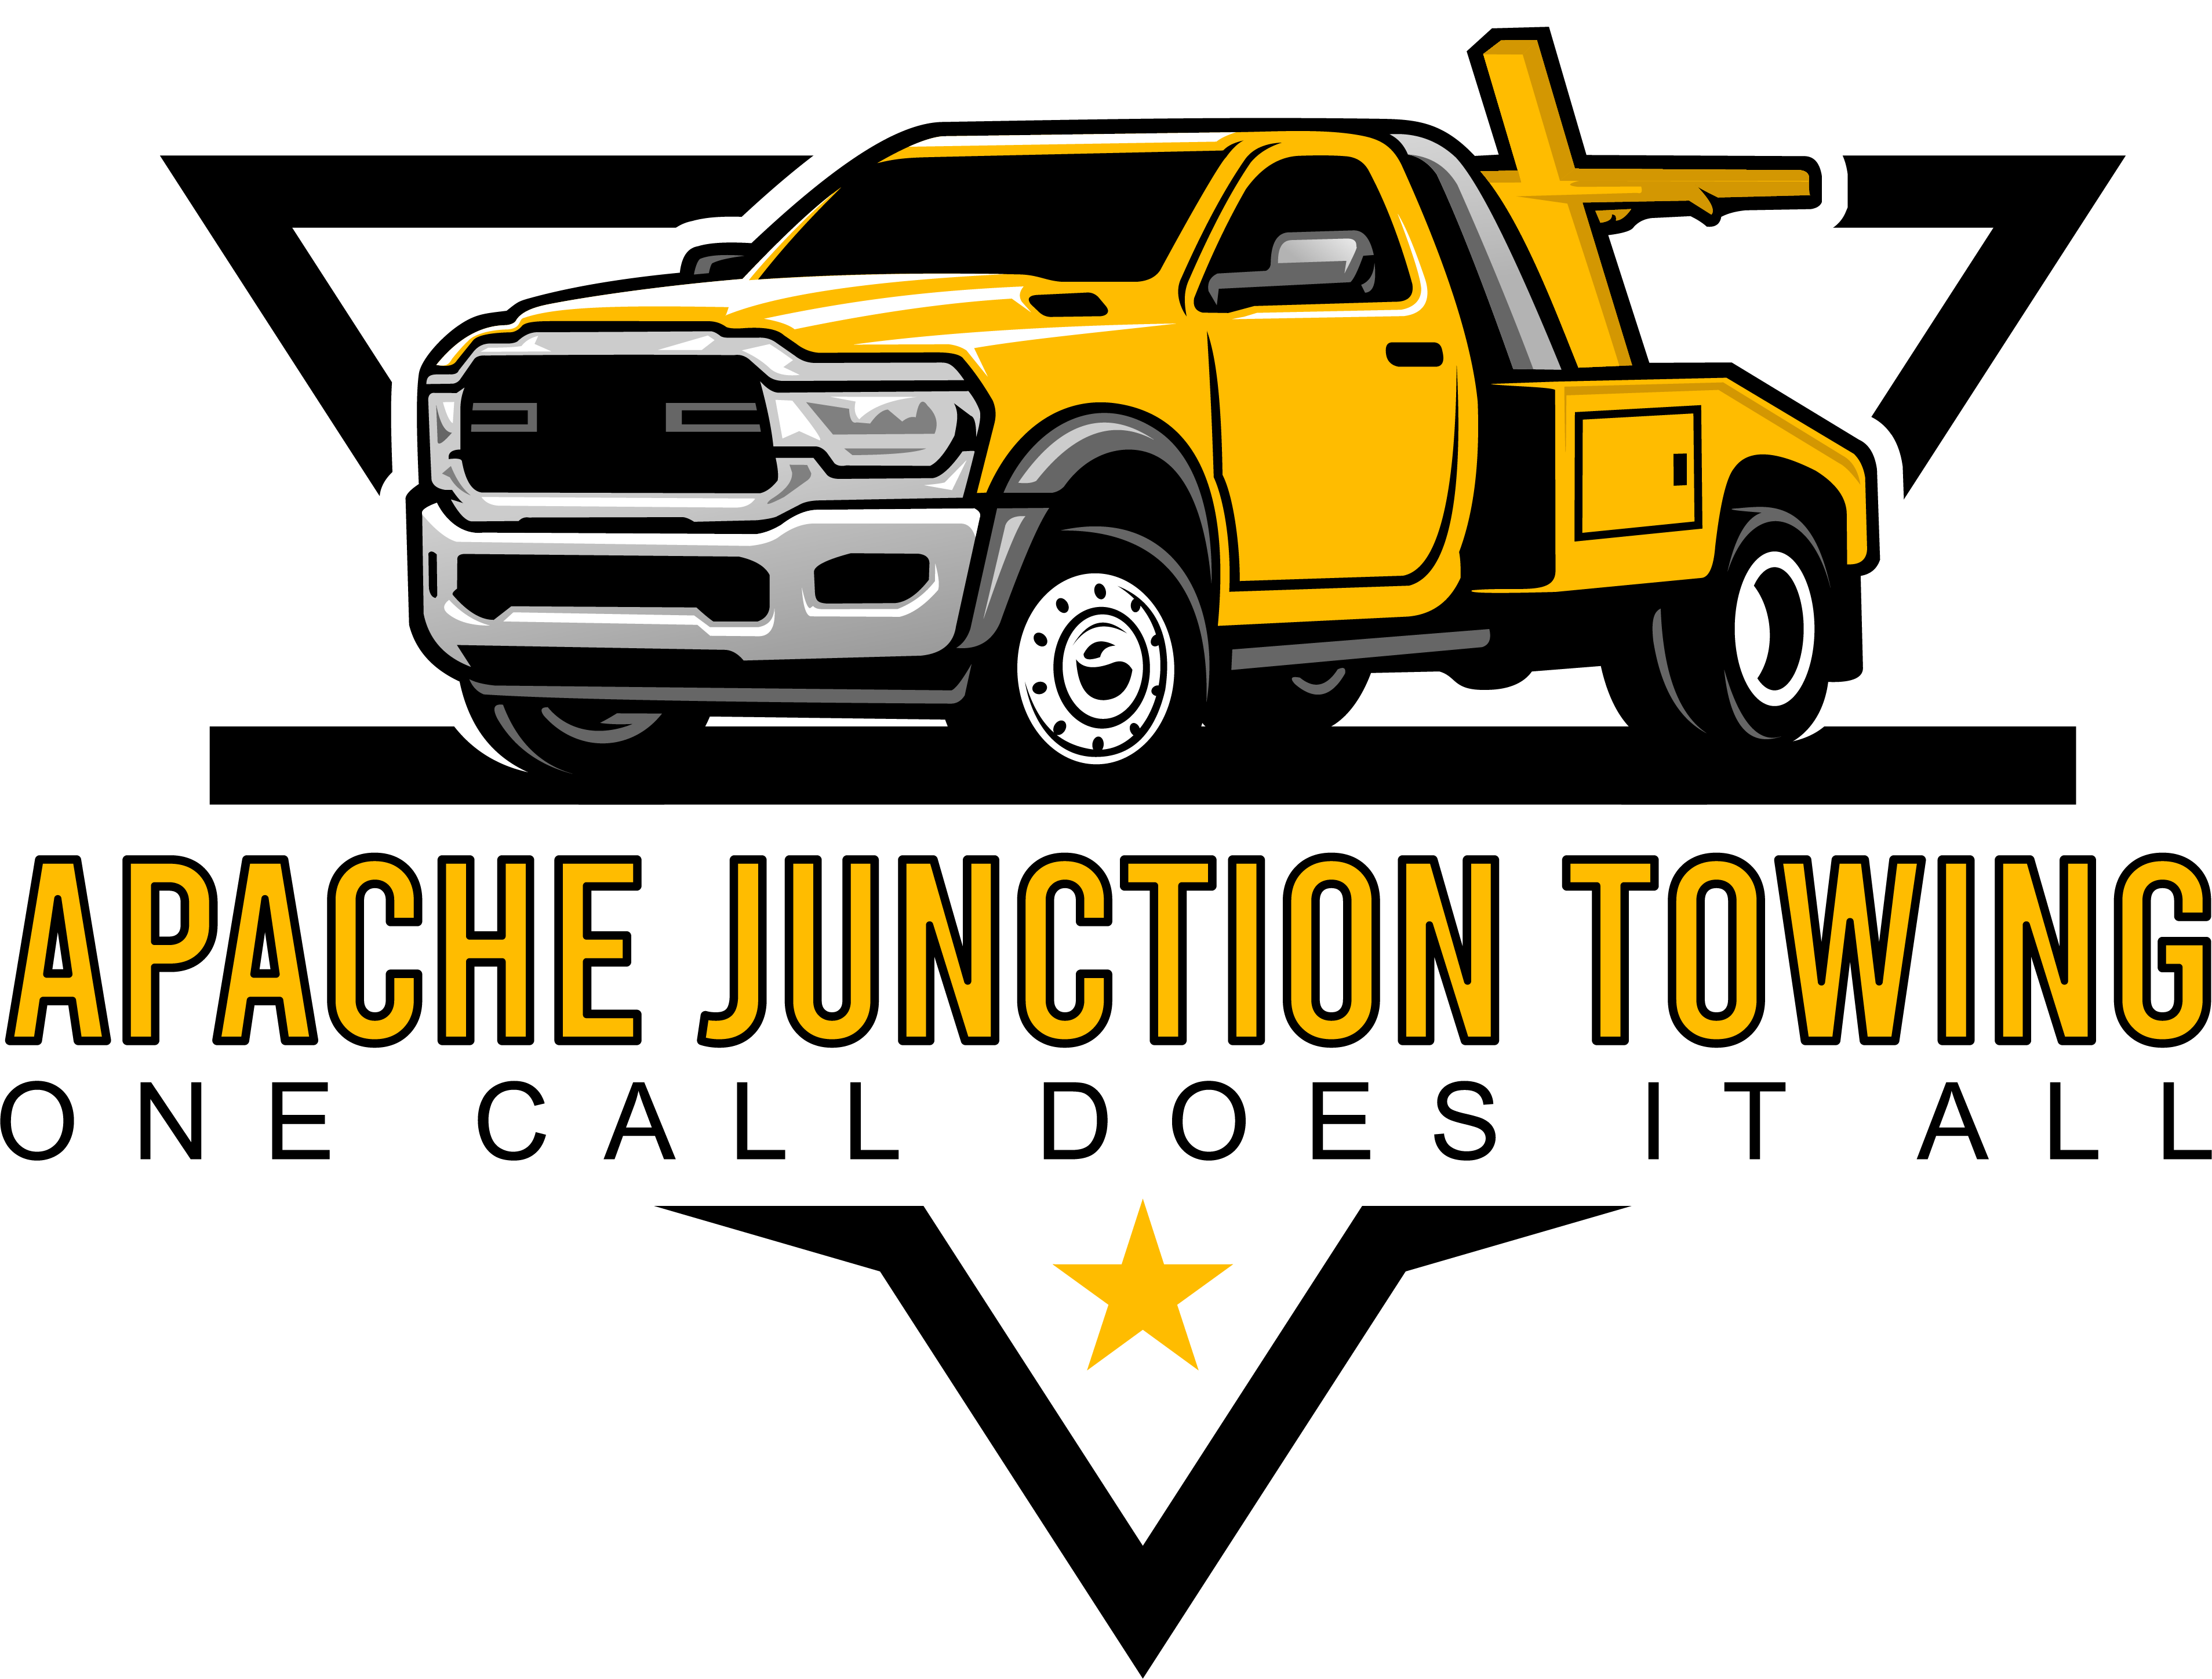 Apache Junction Towing logo